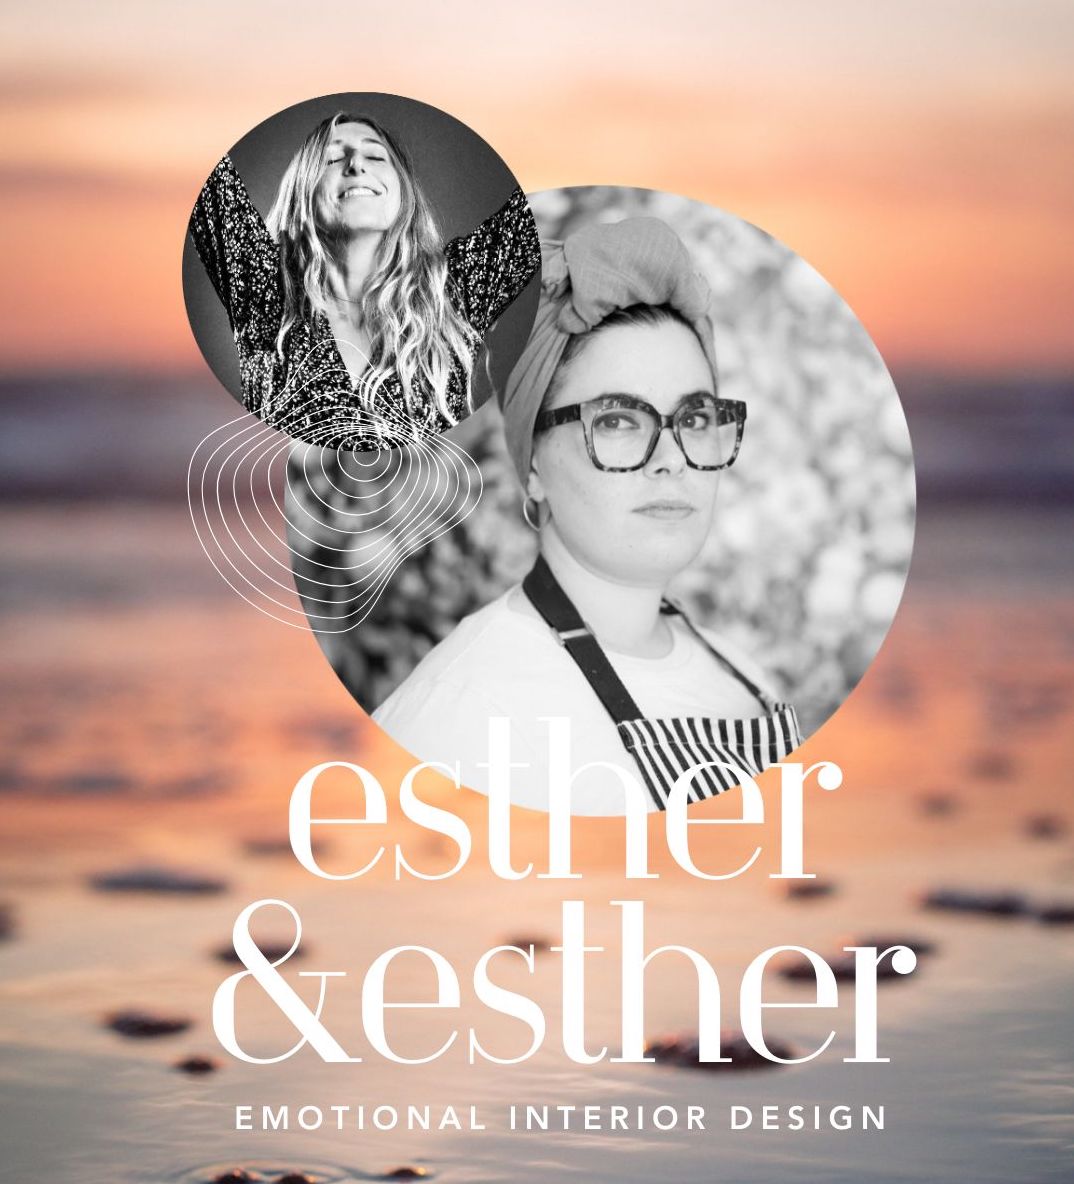 Stop Resisting This: A conversation about authenticity. With Esther & Esther